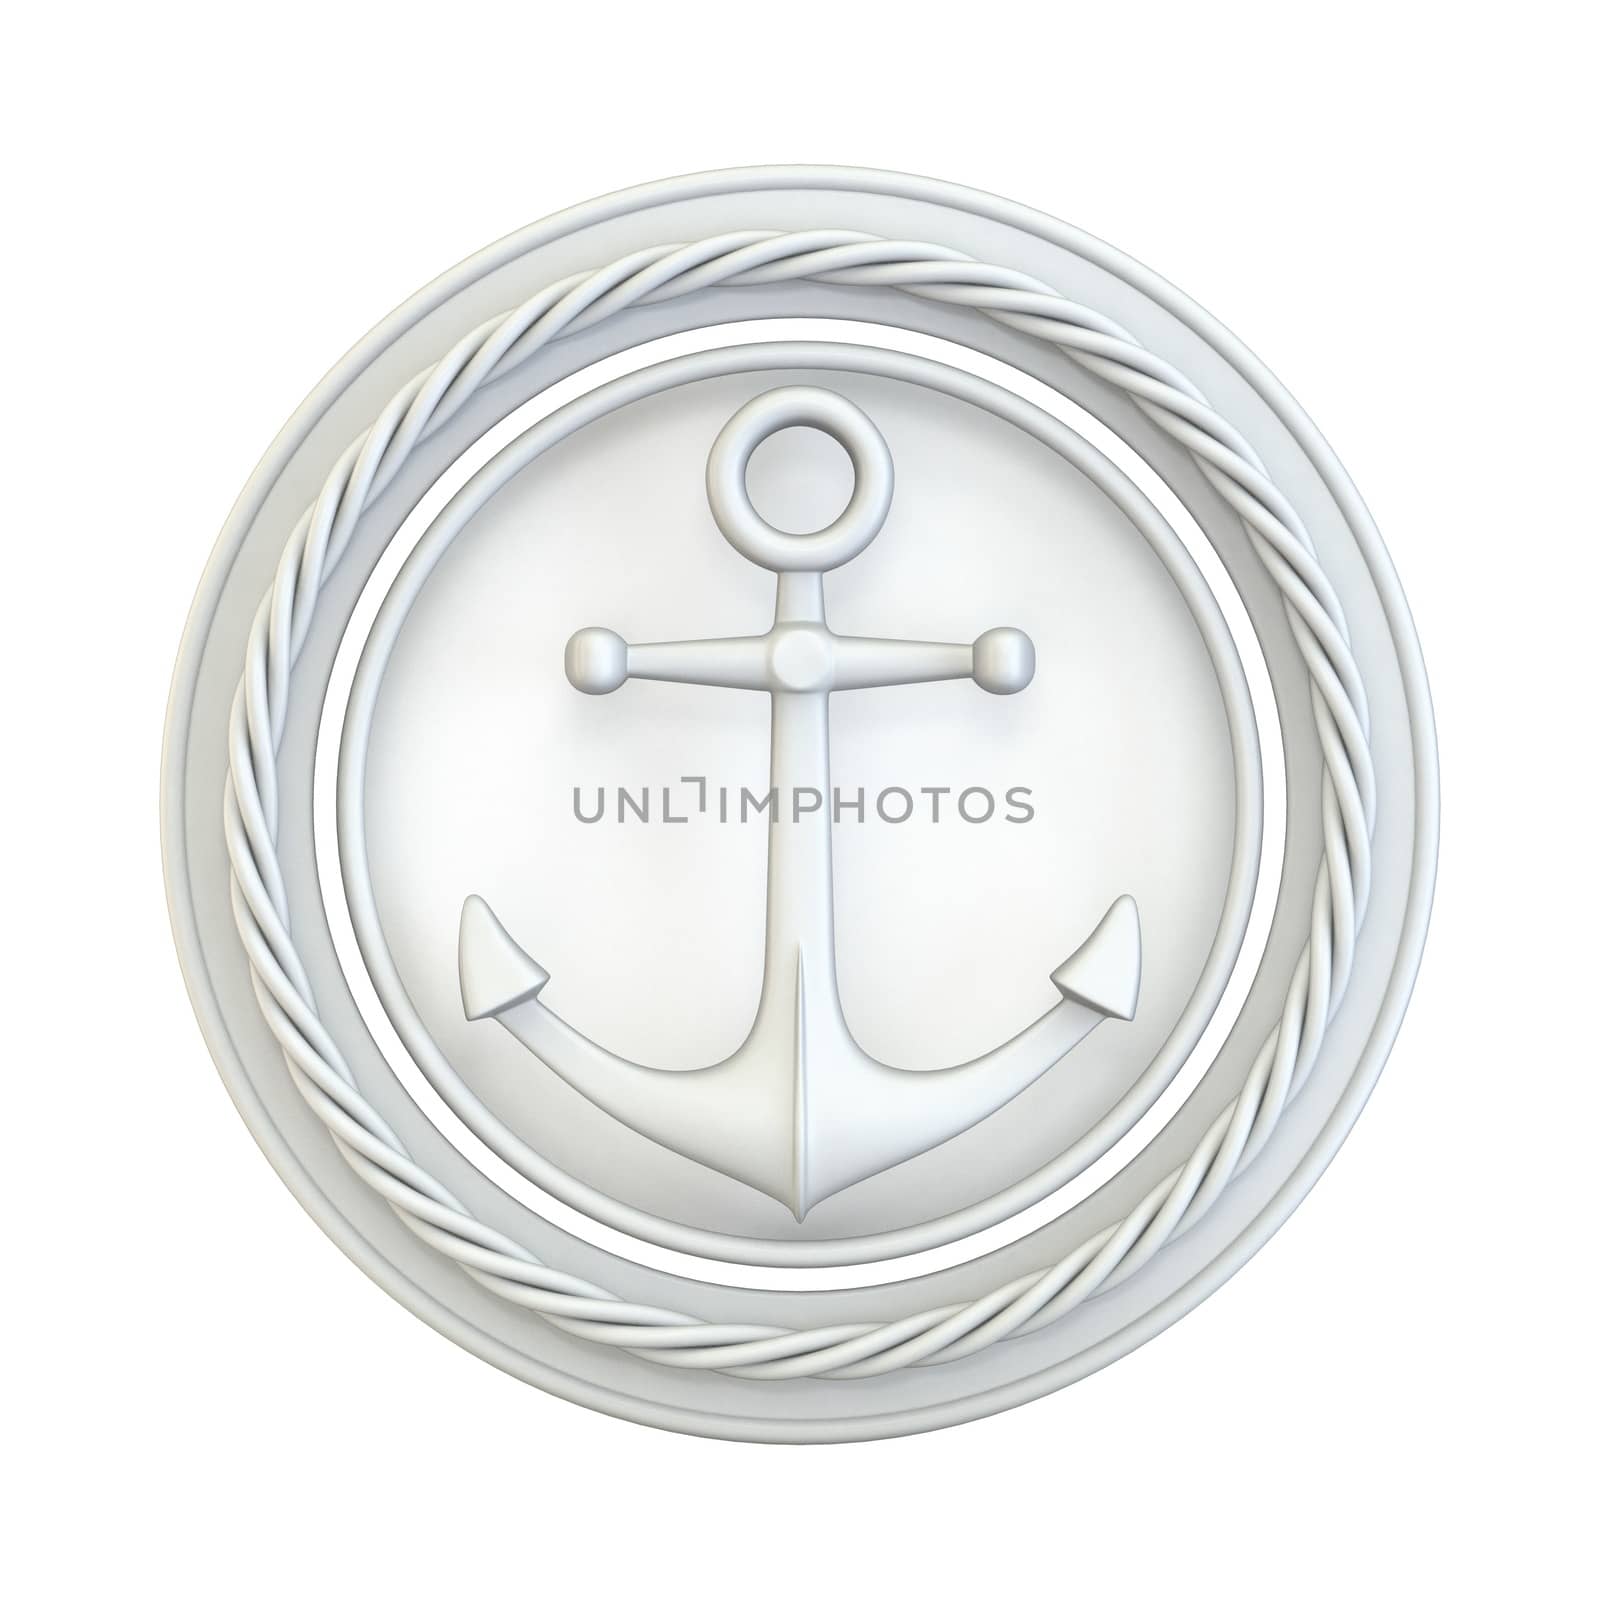 White anchor, circle and rope 3D render illustration isolated on white background